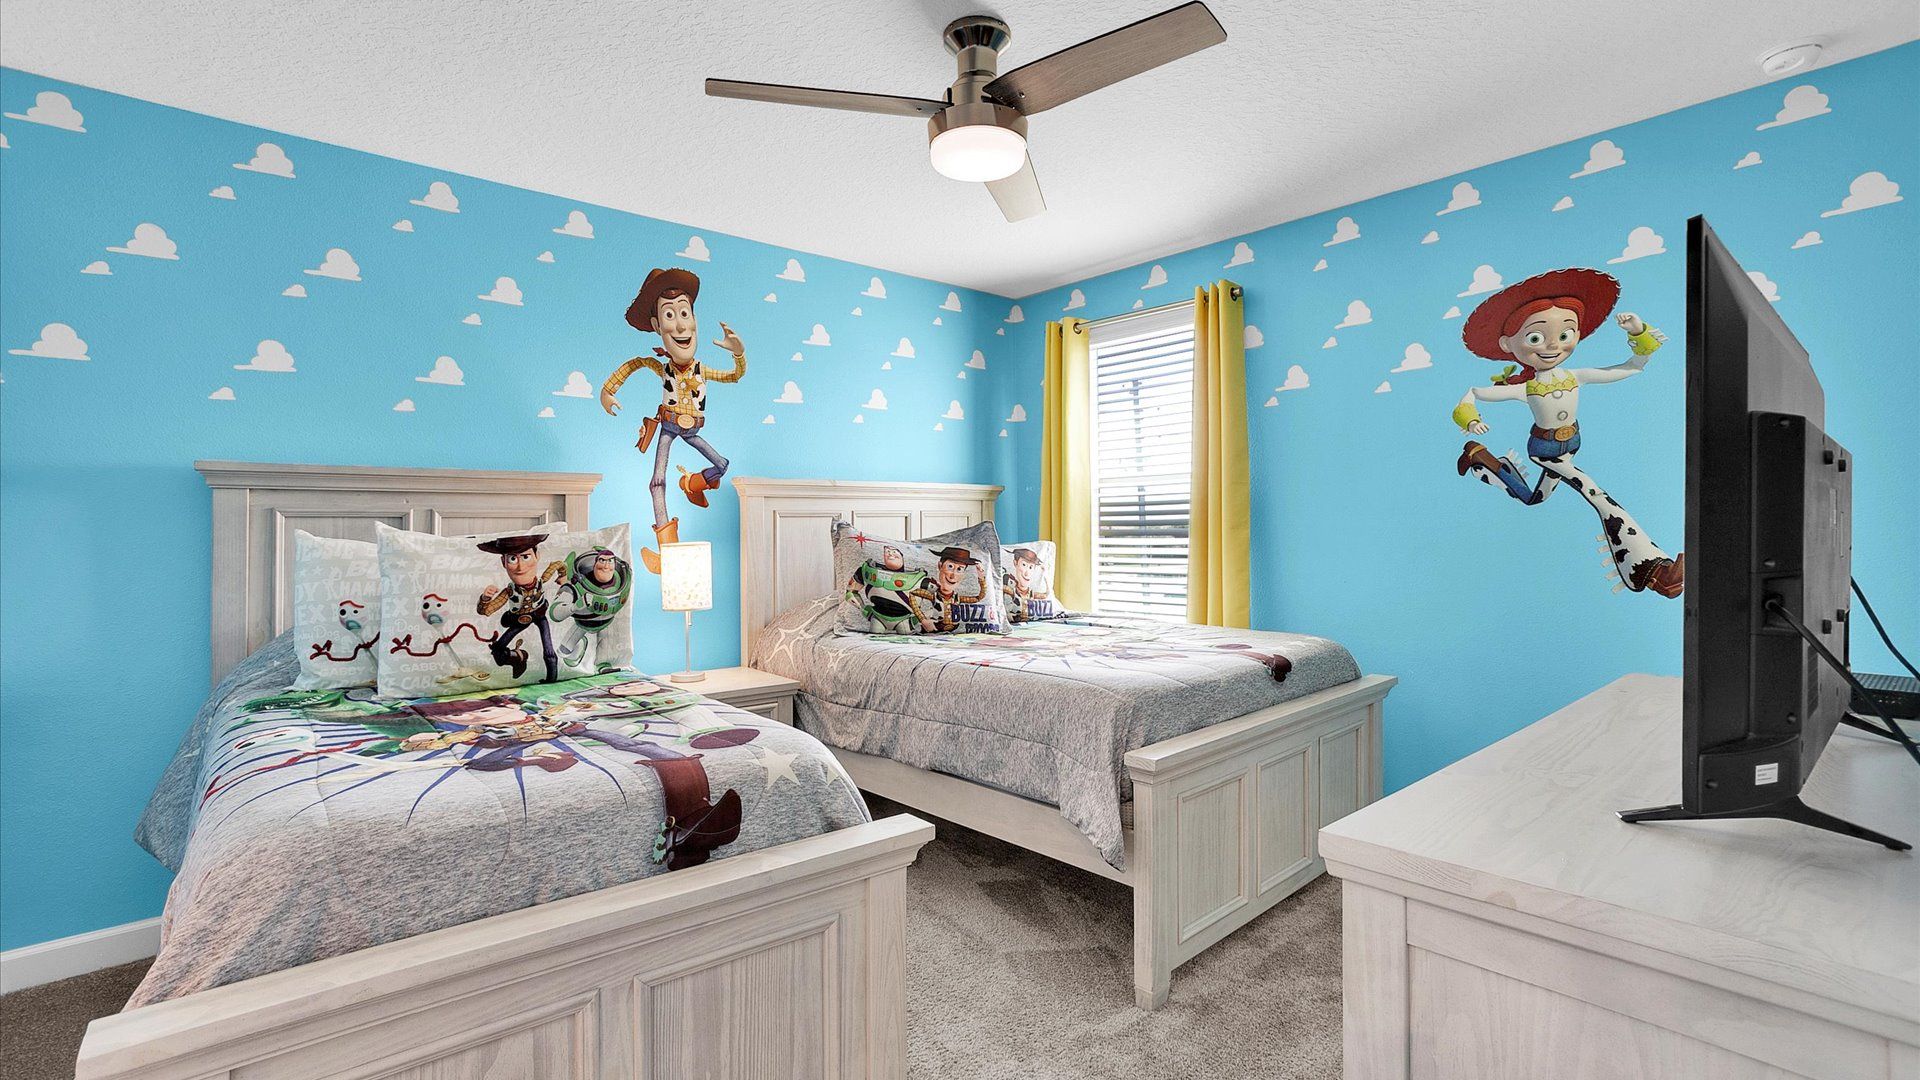 Twin/Double Bedroom 8 Upstairs
Shared Bathroom
Toy Story Theme